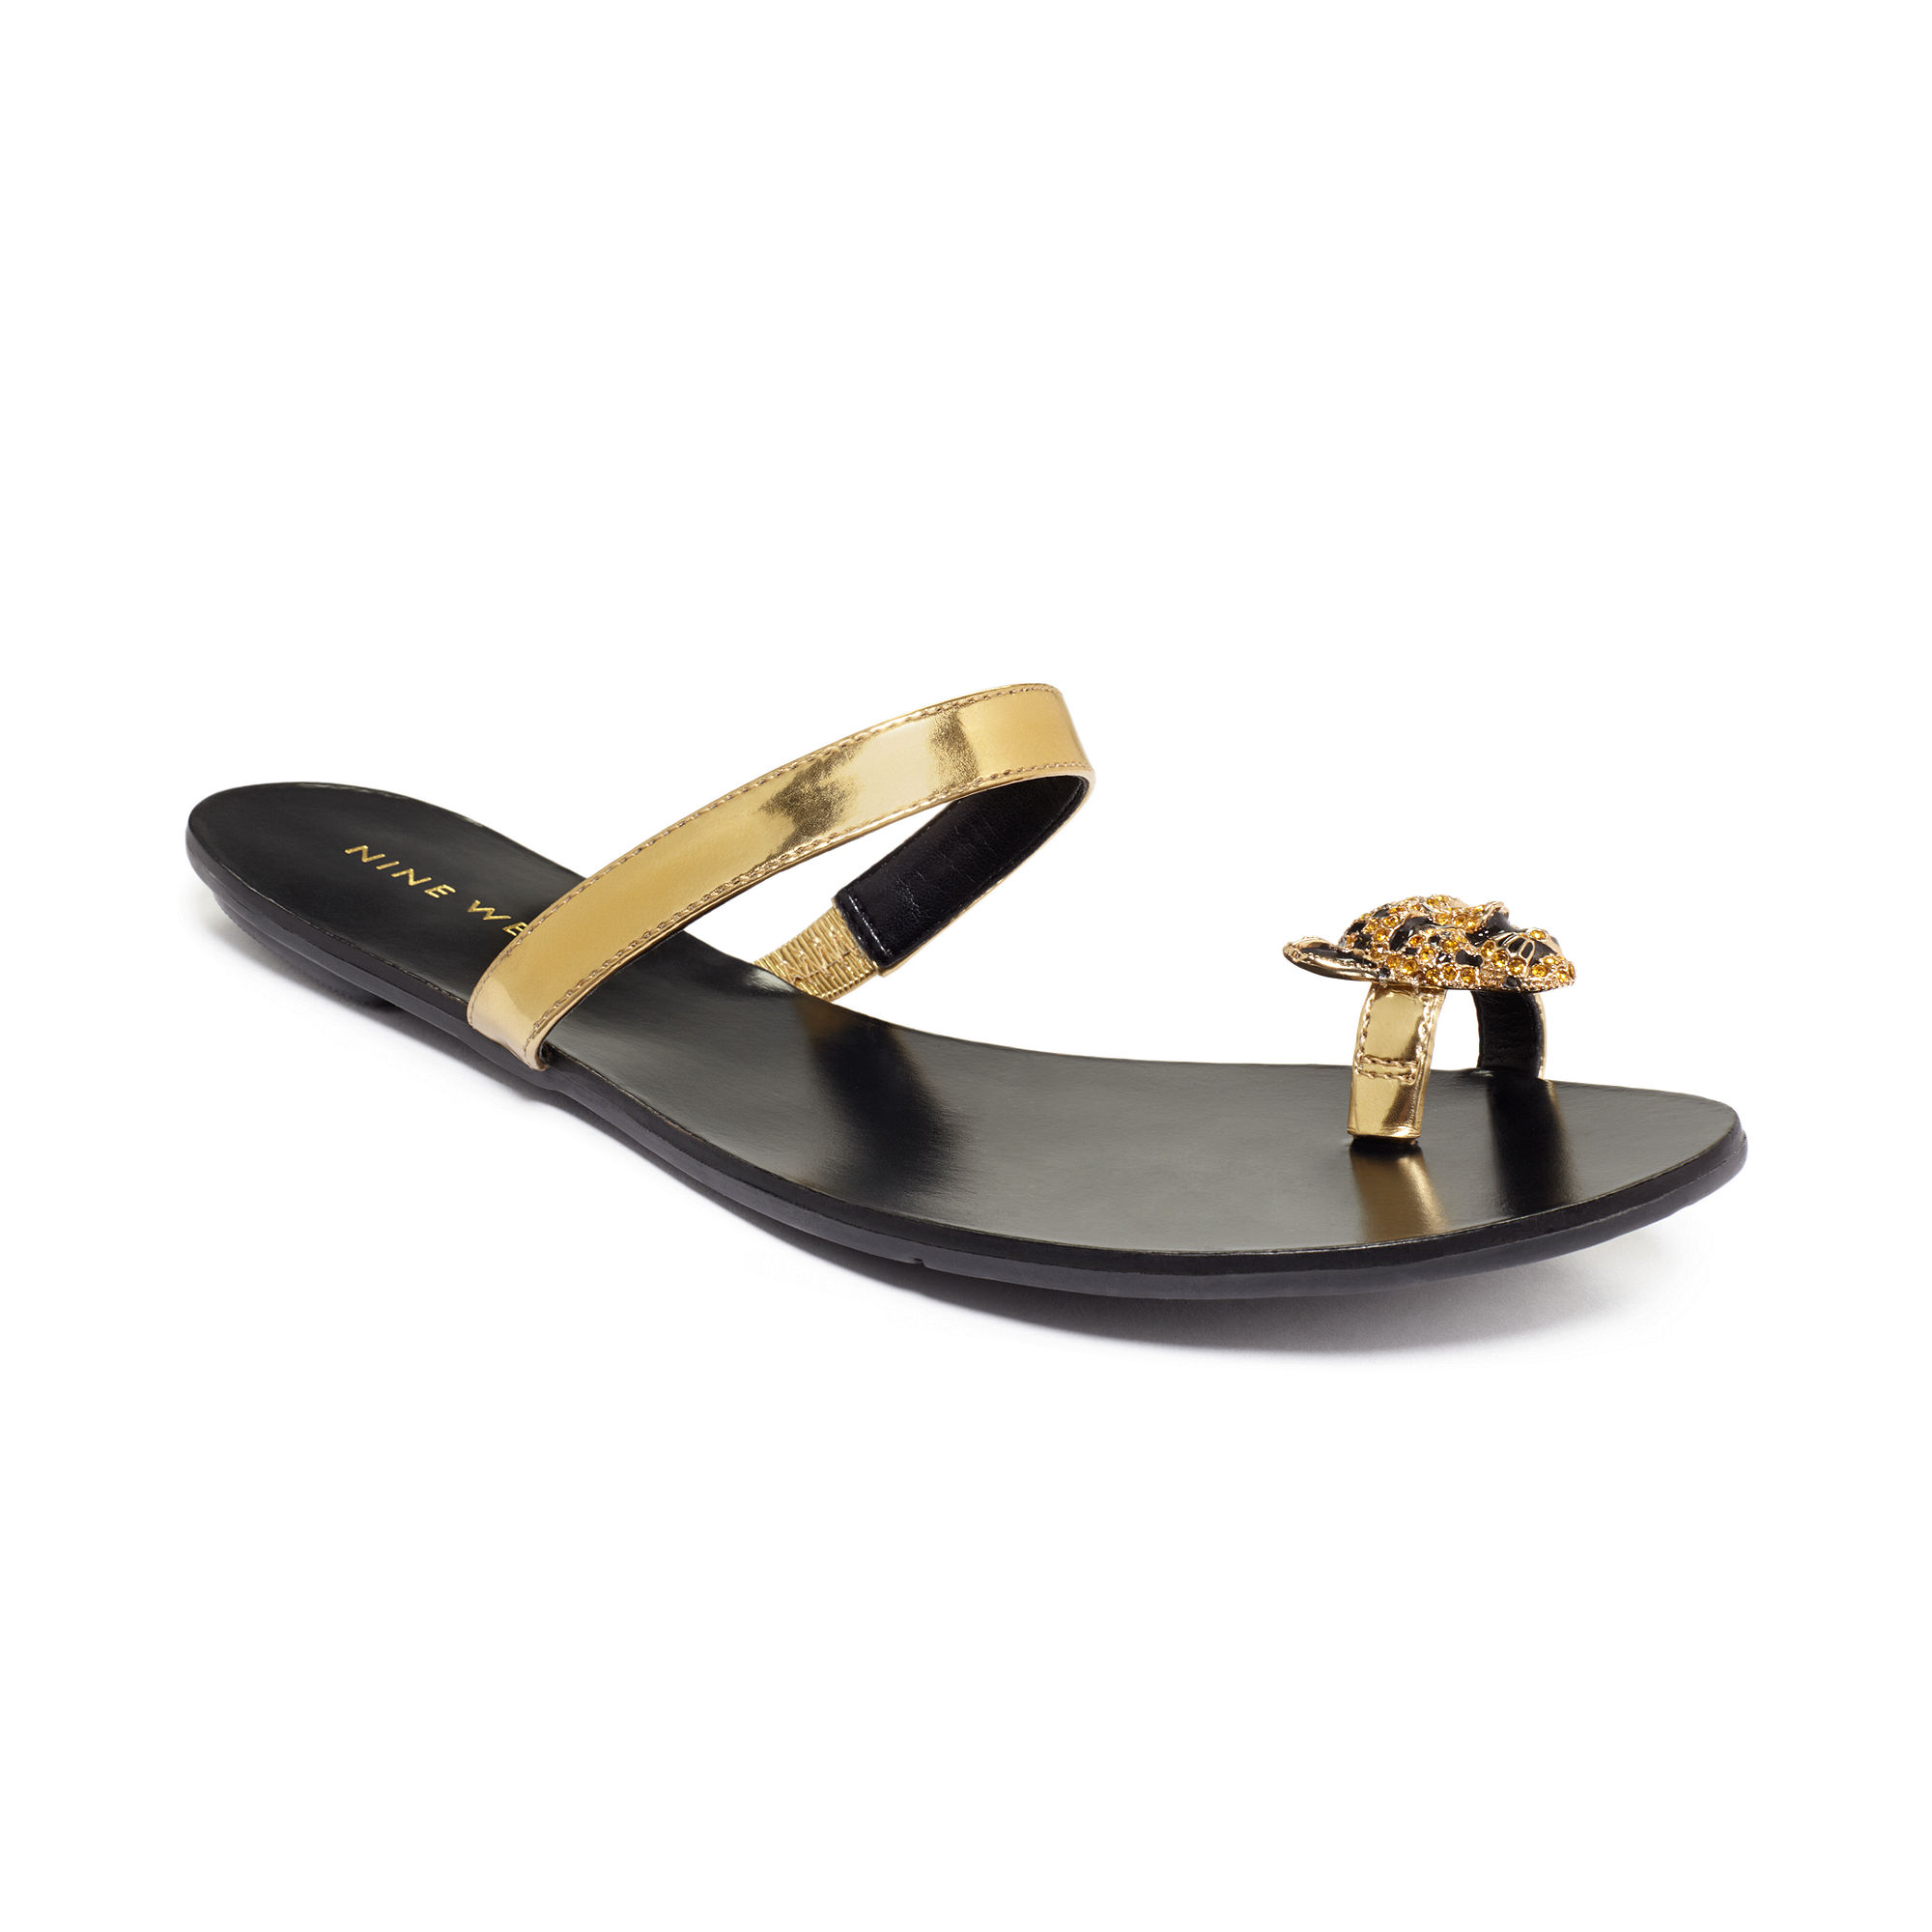 Nine West Seaturtle Panther Flat Sandals in Black - Lyst